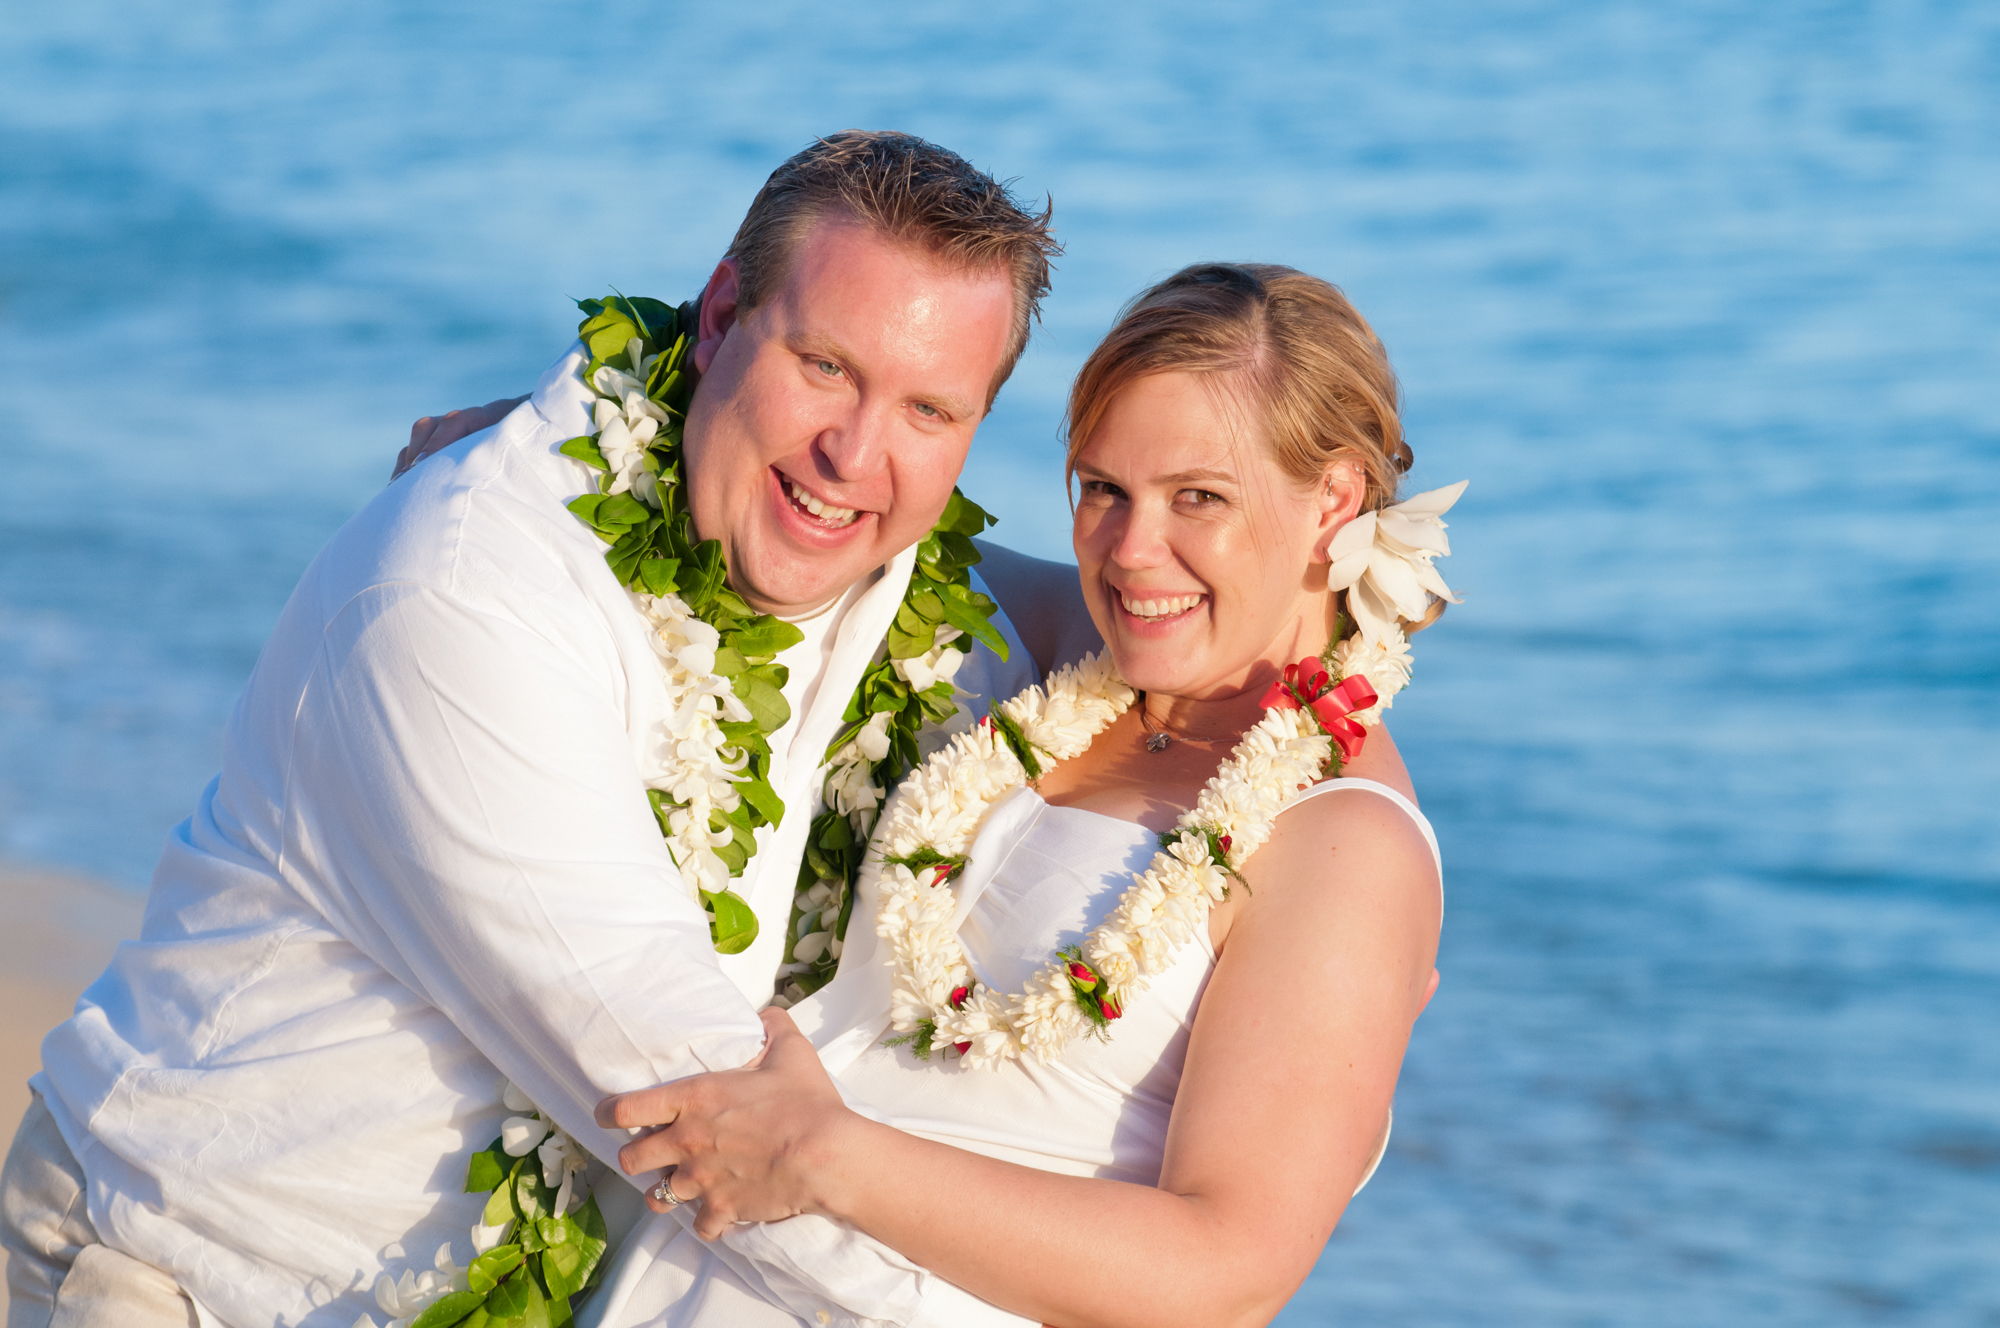 One of our favorite weddings we have shot was in Waikiki, Hawaii at the Hale Koa hotel. The Hale Koa is a military hotel and caters to all enlisted personnel as well as officers in the military. It is located on the main drag in Waikiki and right next to the Hilton Waikiki hotel. You simply can not beat the wonderful weather that Oahu has to offer.